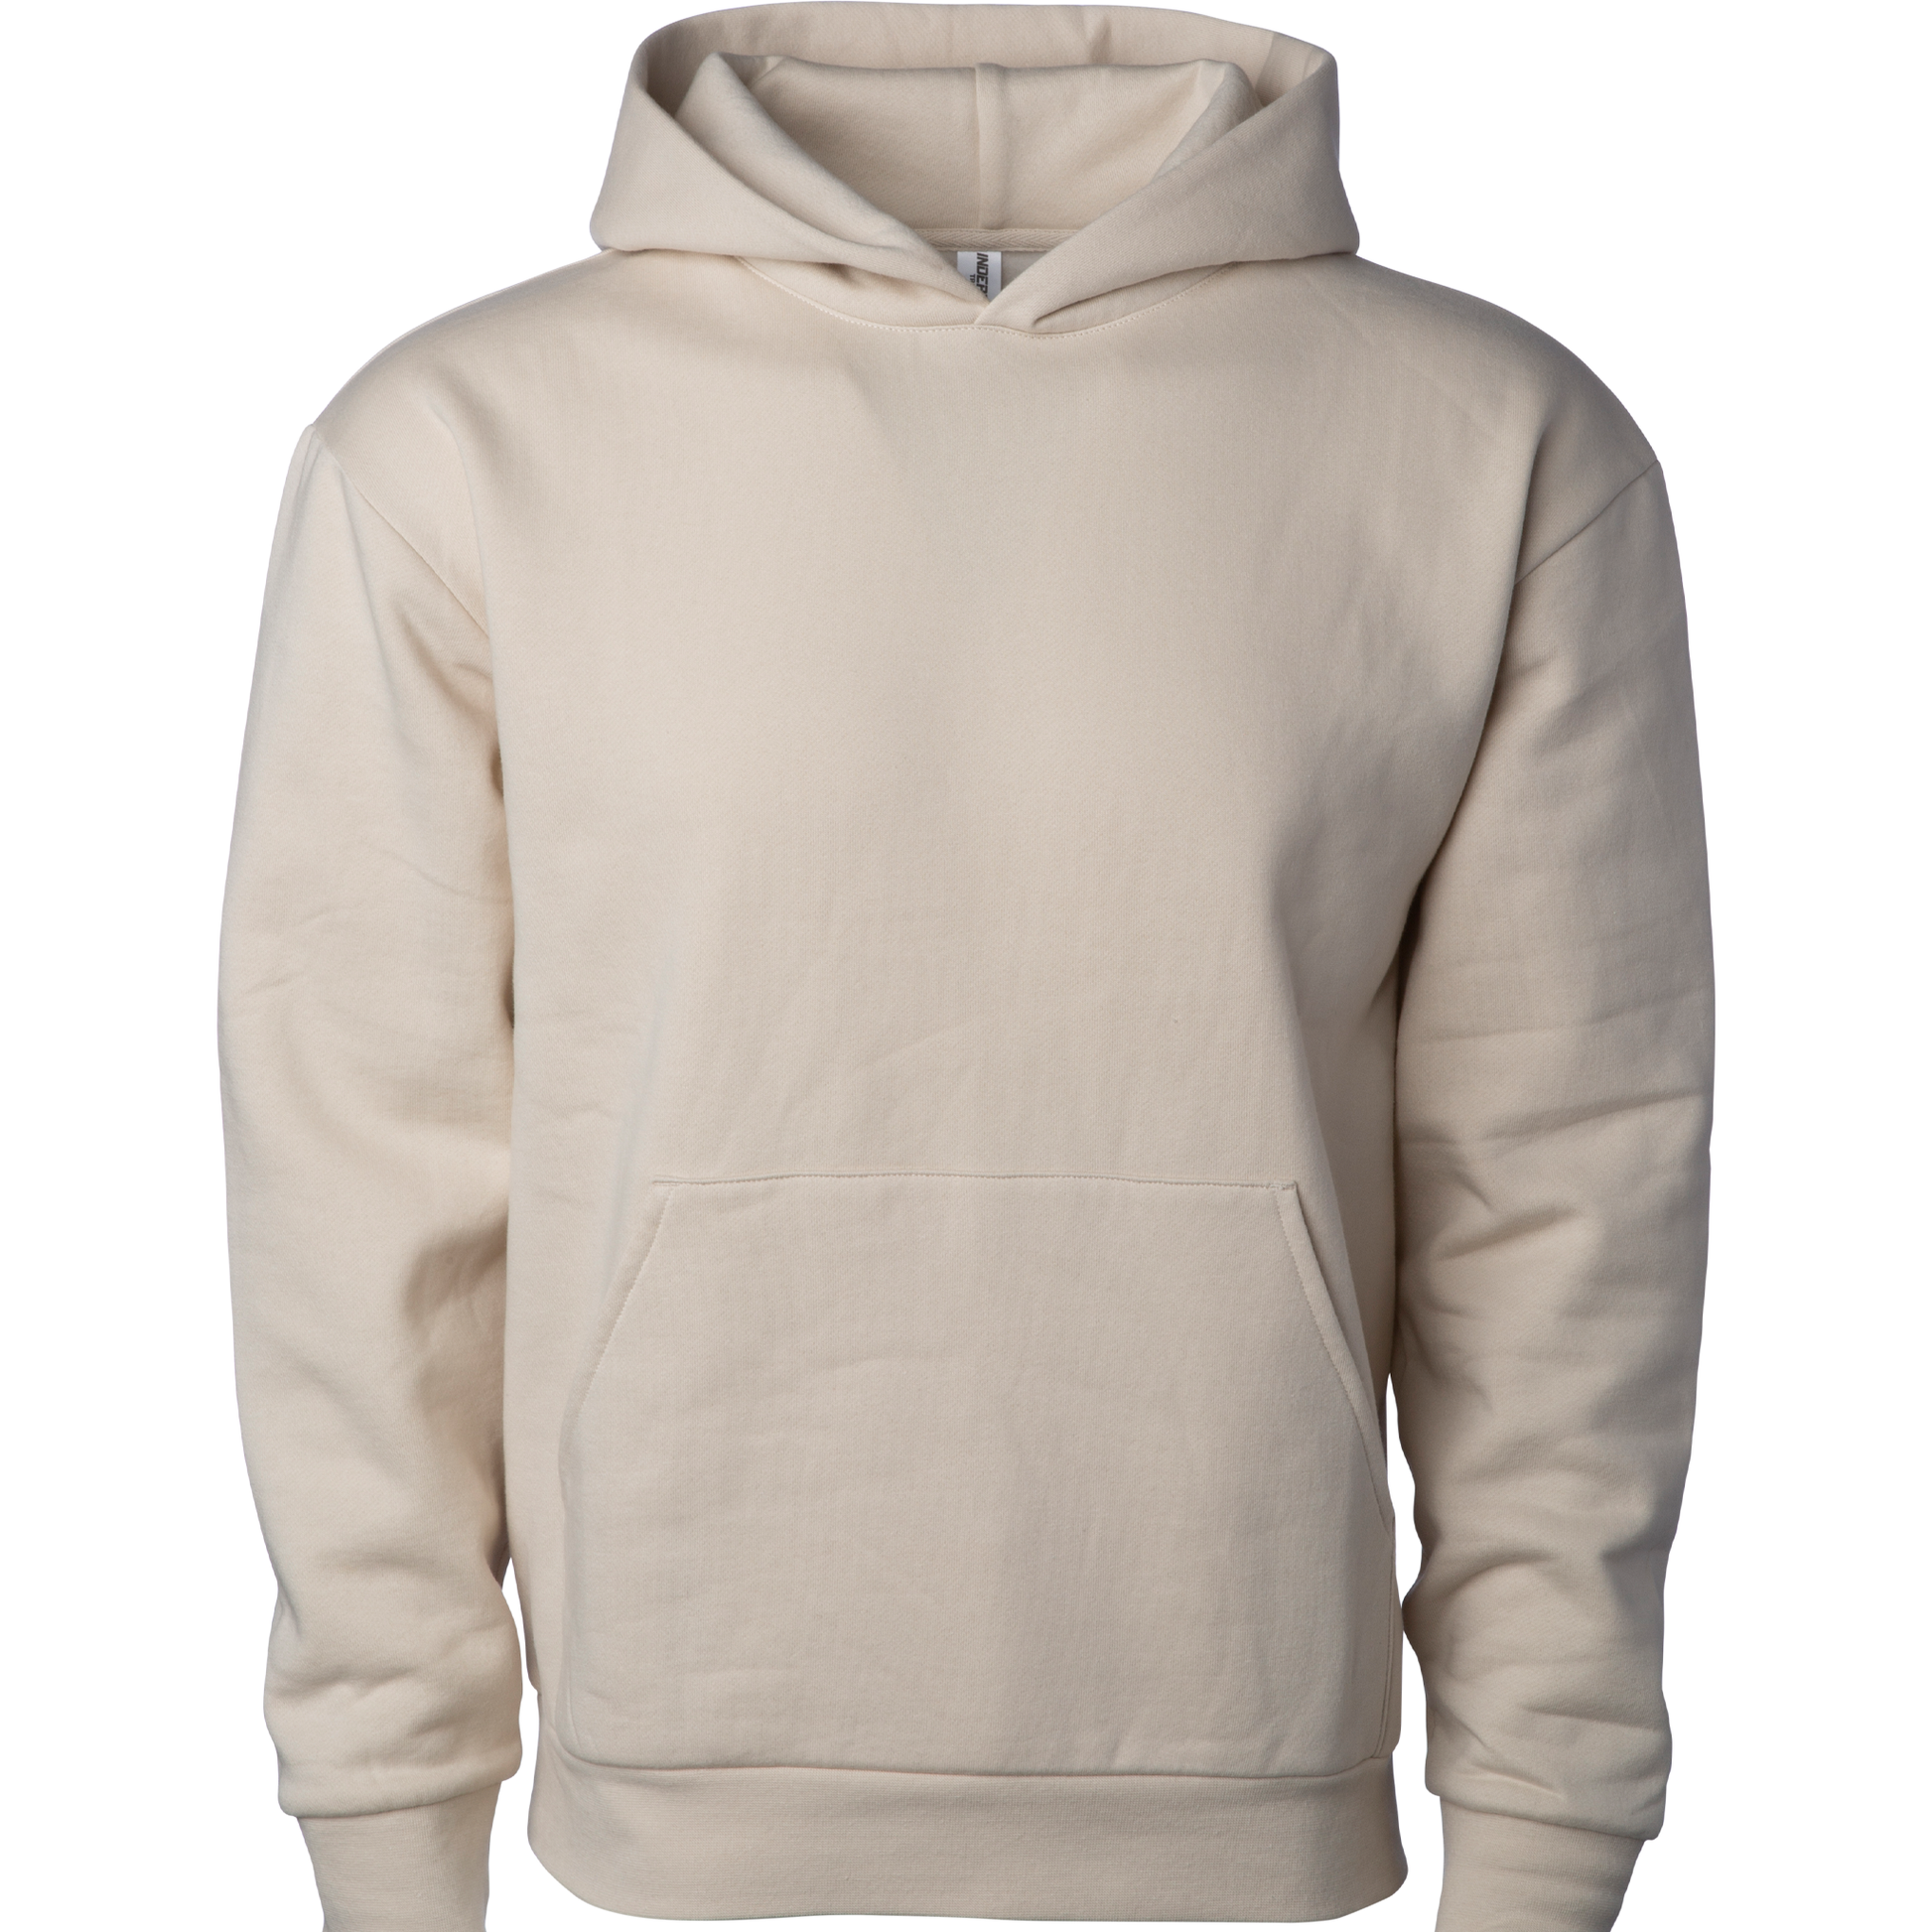 https://torontoapparel.ca/cdn/shop/files/independent-ind280sl-avenue-280gm-midweight-pullover-hood-ivory-xs-hoodie-853.png?v=1708954340&width=1946